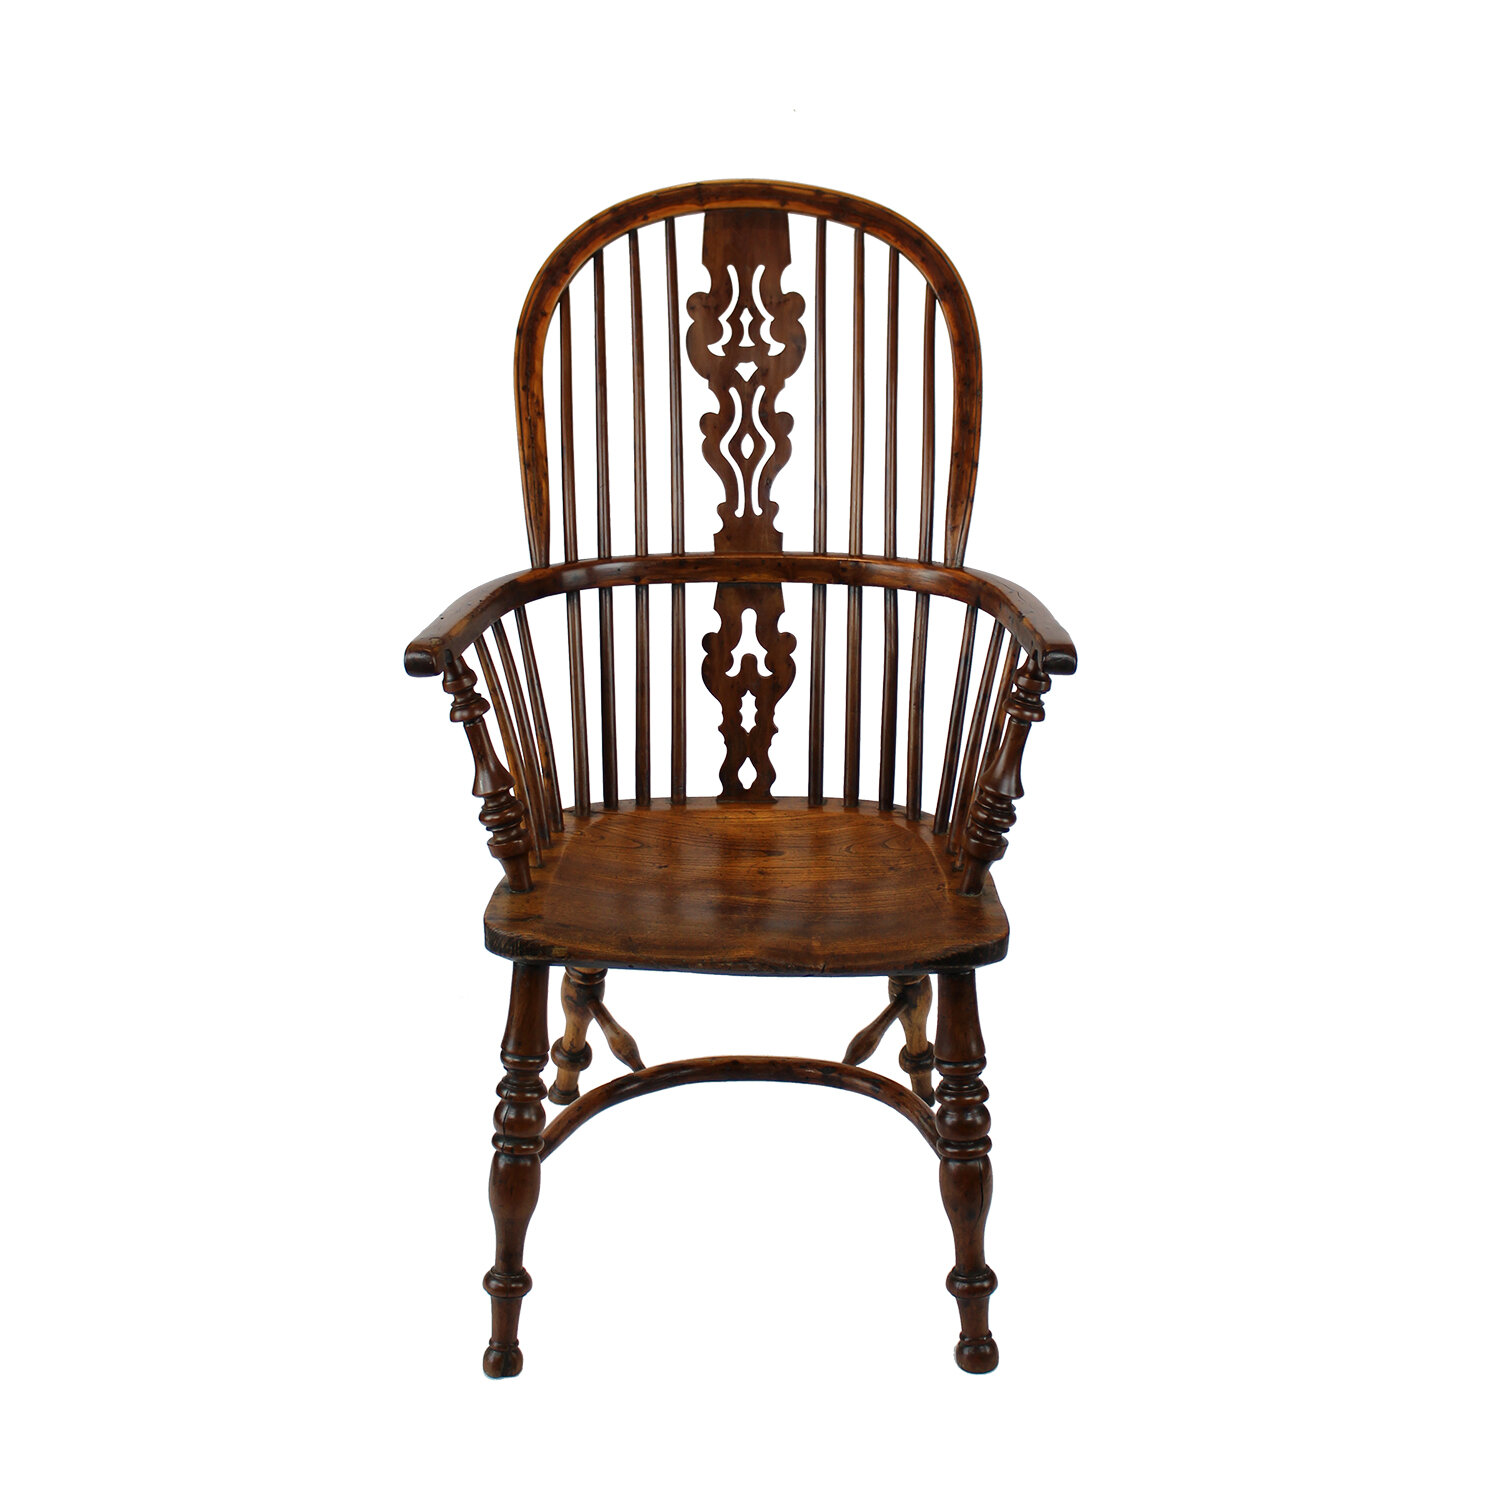 Yew Wood Spindle Back Windsor Armchair, Circa 1800